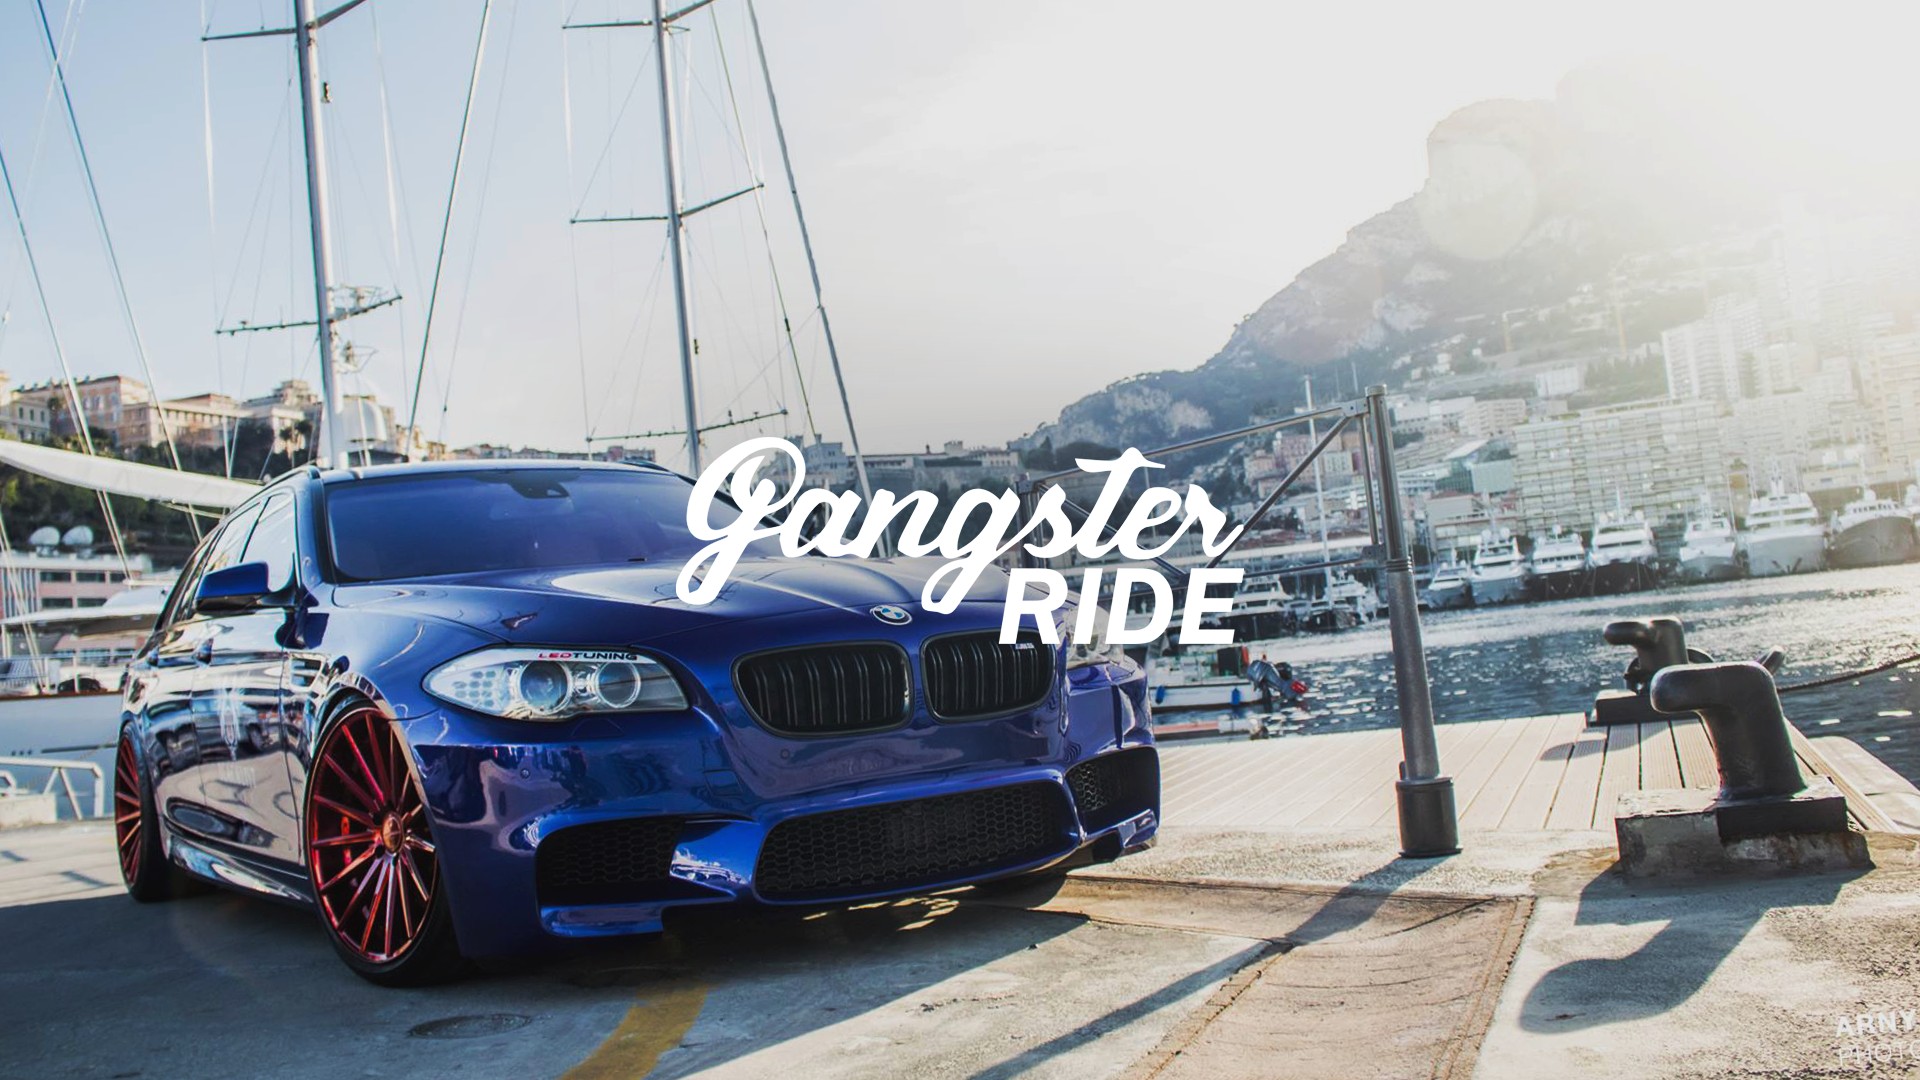 GANGSTER RIDE, Police, Gangsters, Gangster, Smoke, Smoking, Lowrider, BMX, Mask, Gas masks, BMW, Car, Colorful, YouTube Wallpaper